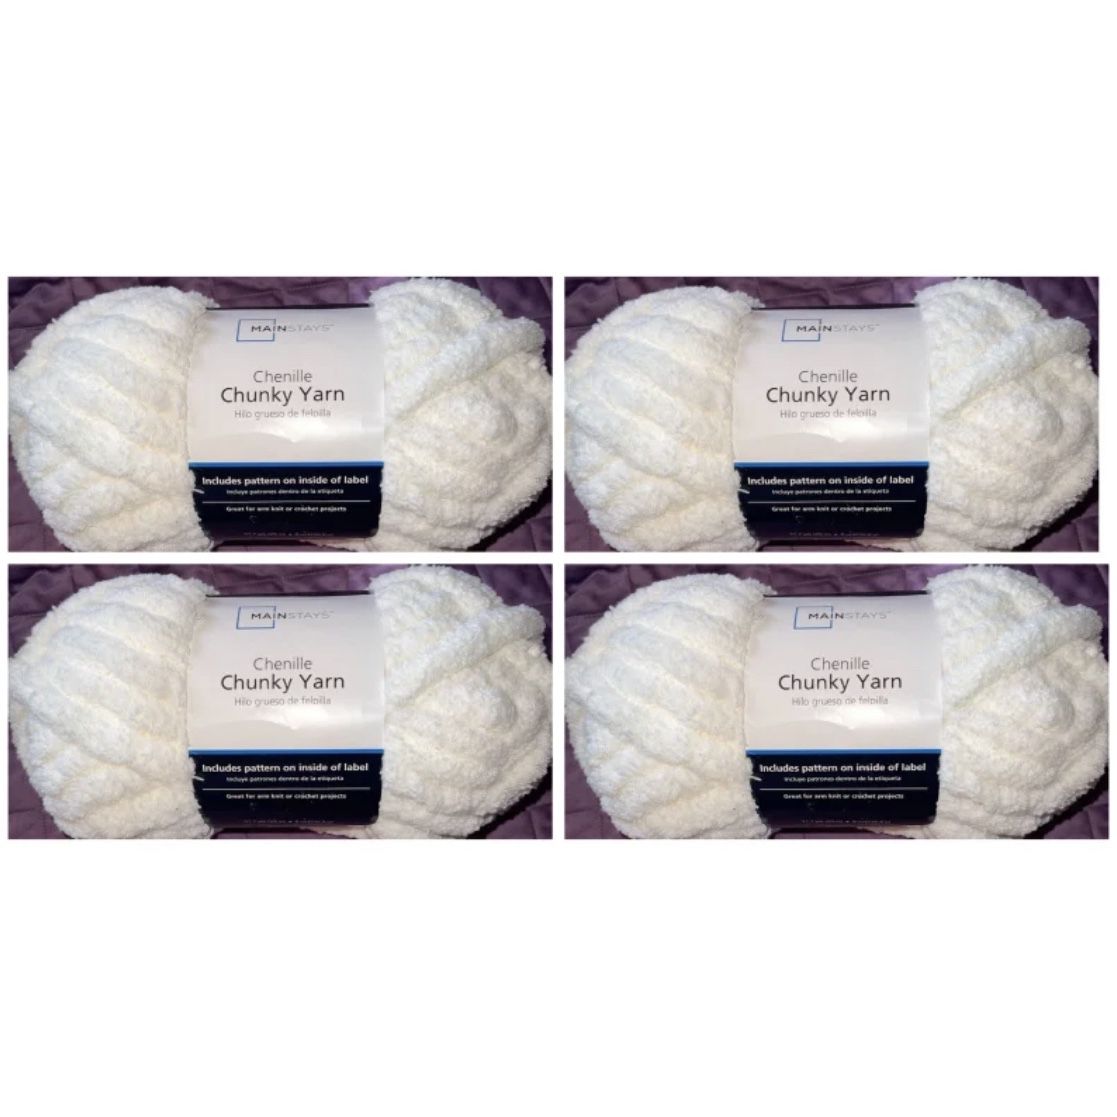 4 Skeins Mainstays Chenille Chunky Yarn for Sale in Sacramento, CA - OfferUp